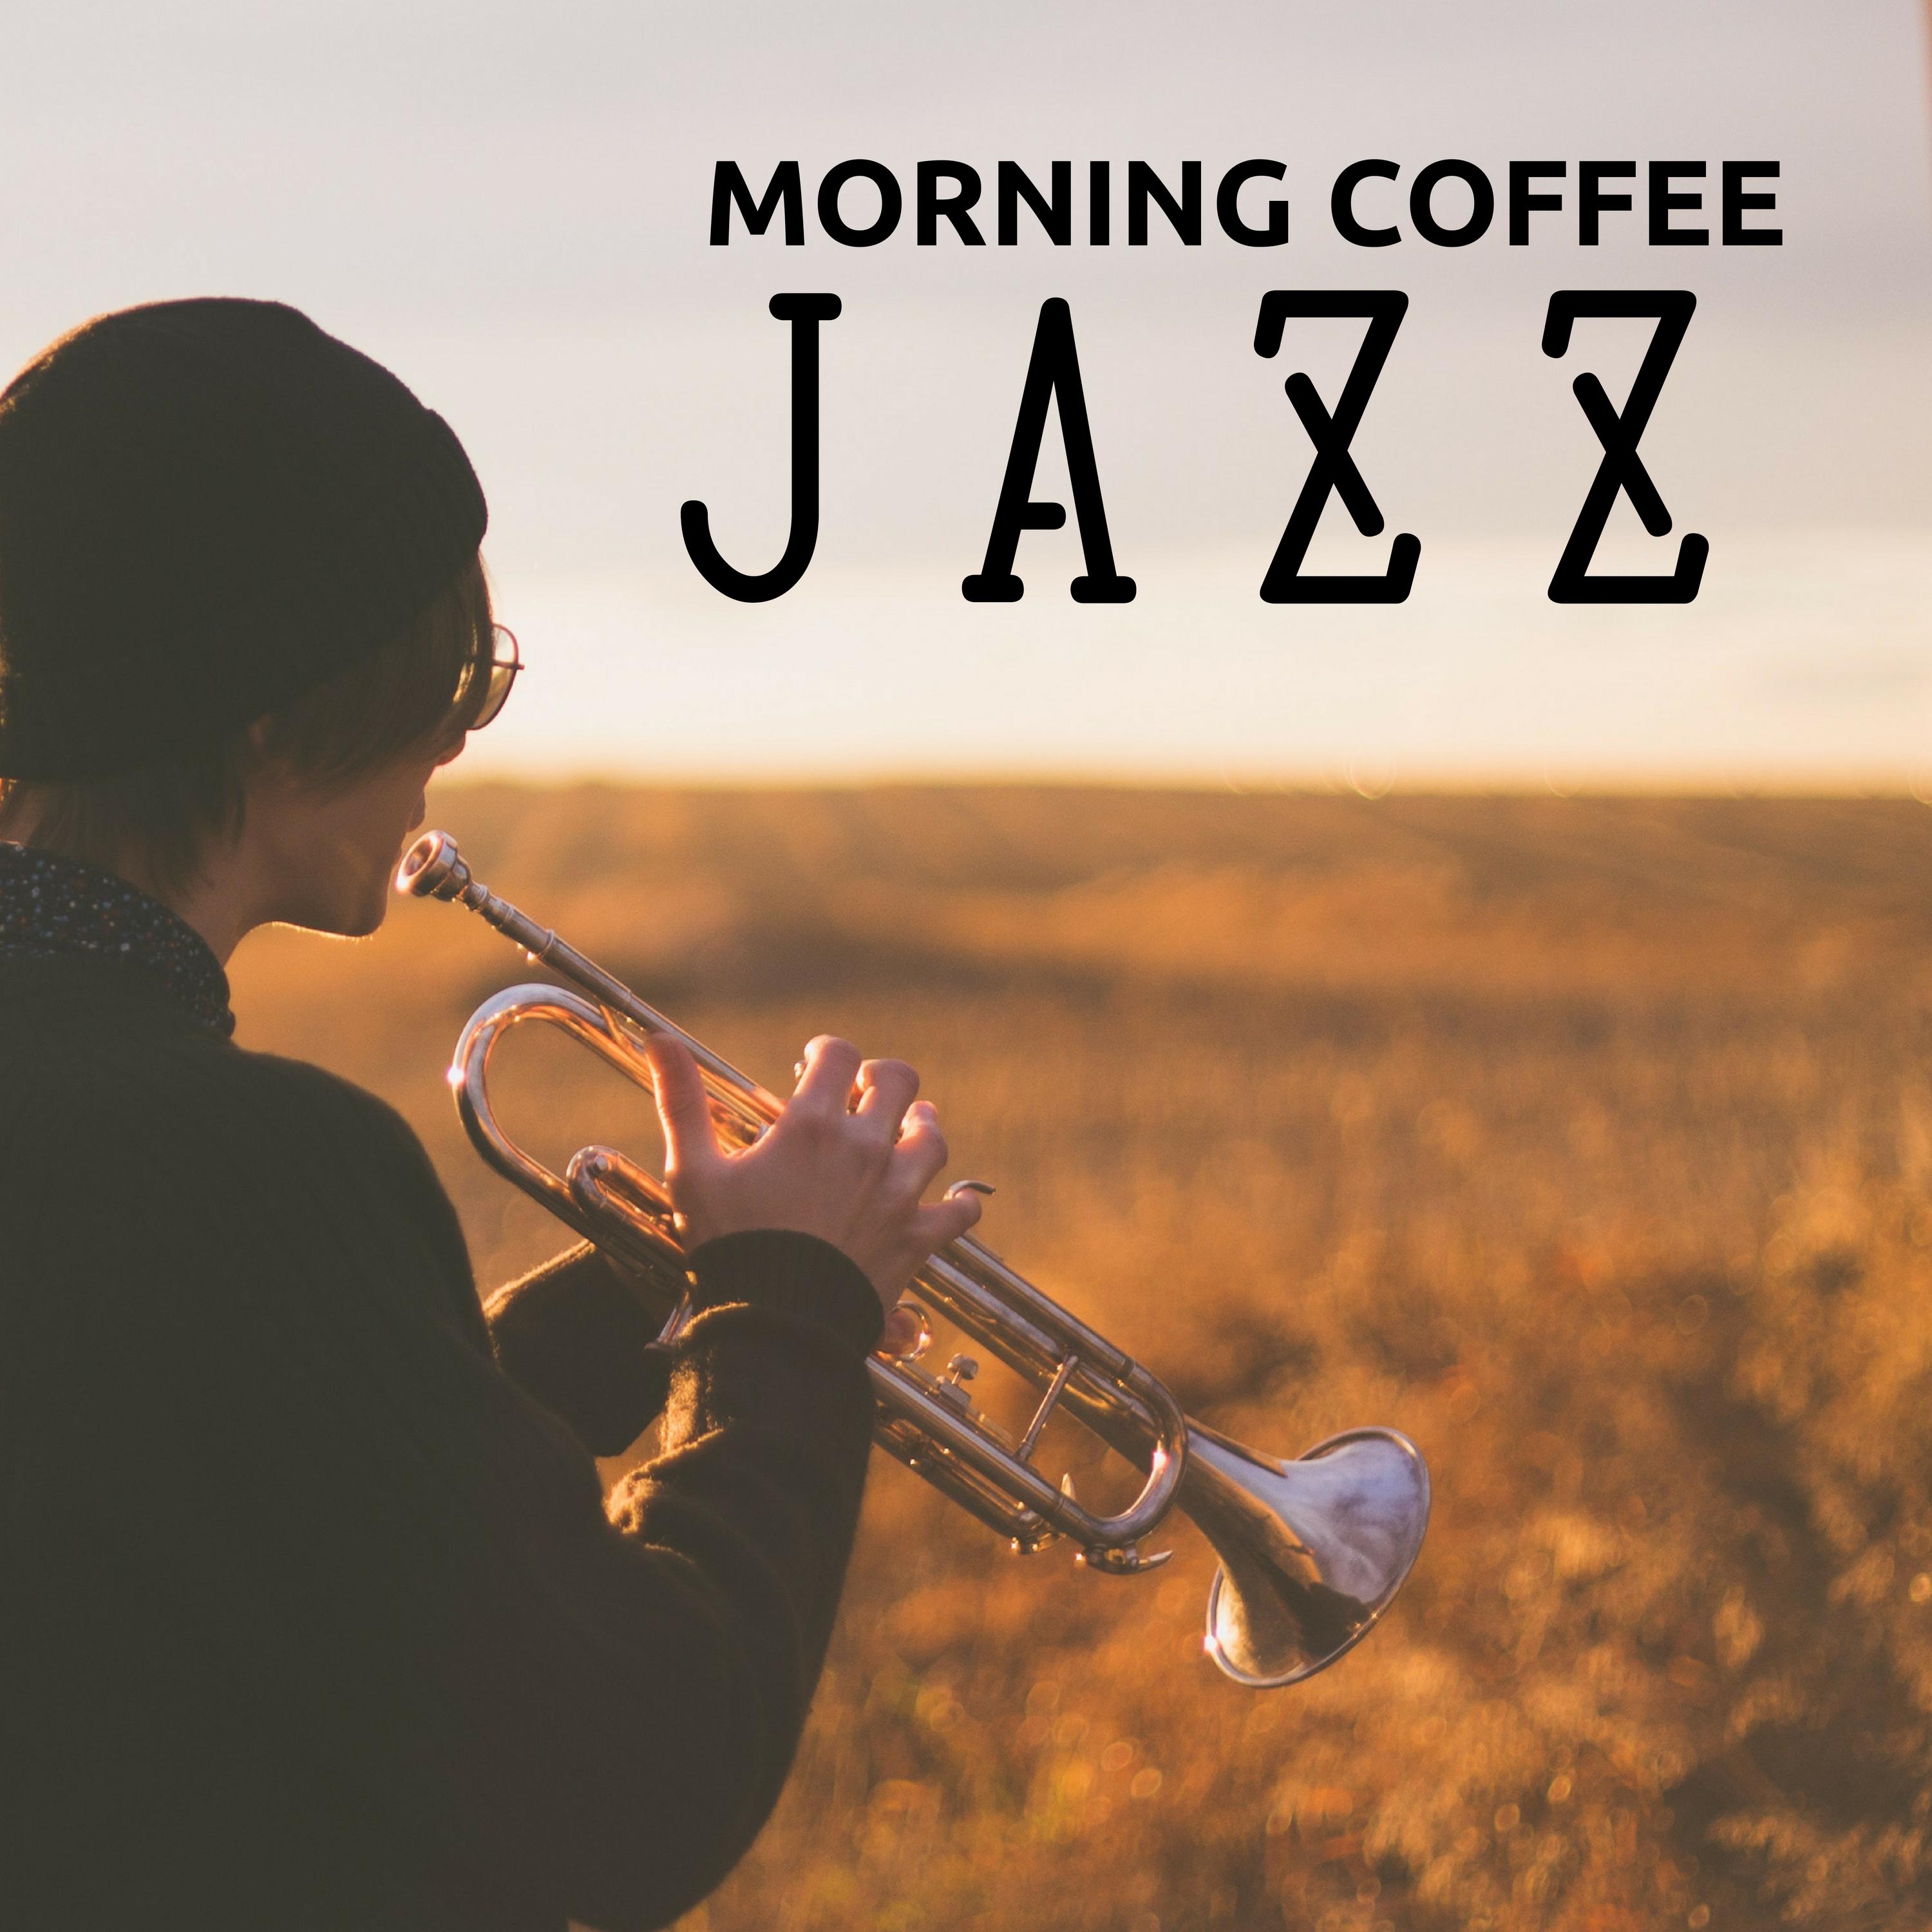 Morning Coffee Jazz 22 - A selection of the Most Soothing Jazz Music for a Perfect Breakfast with your Second Half